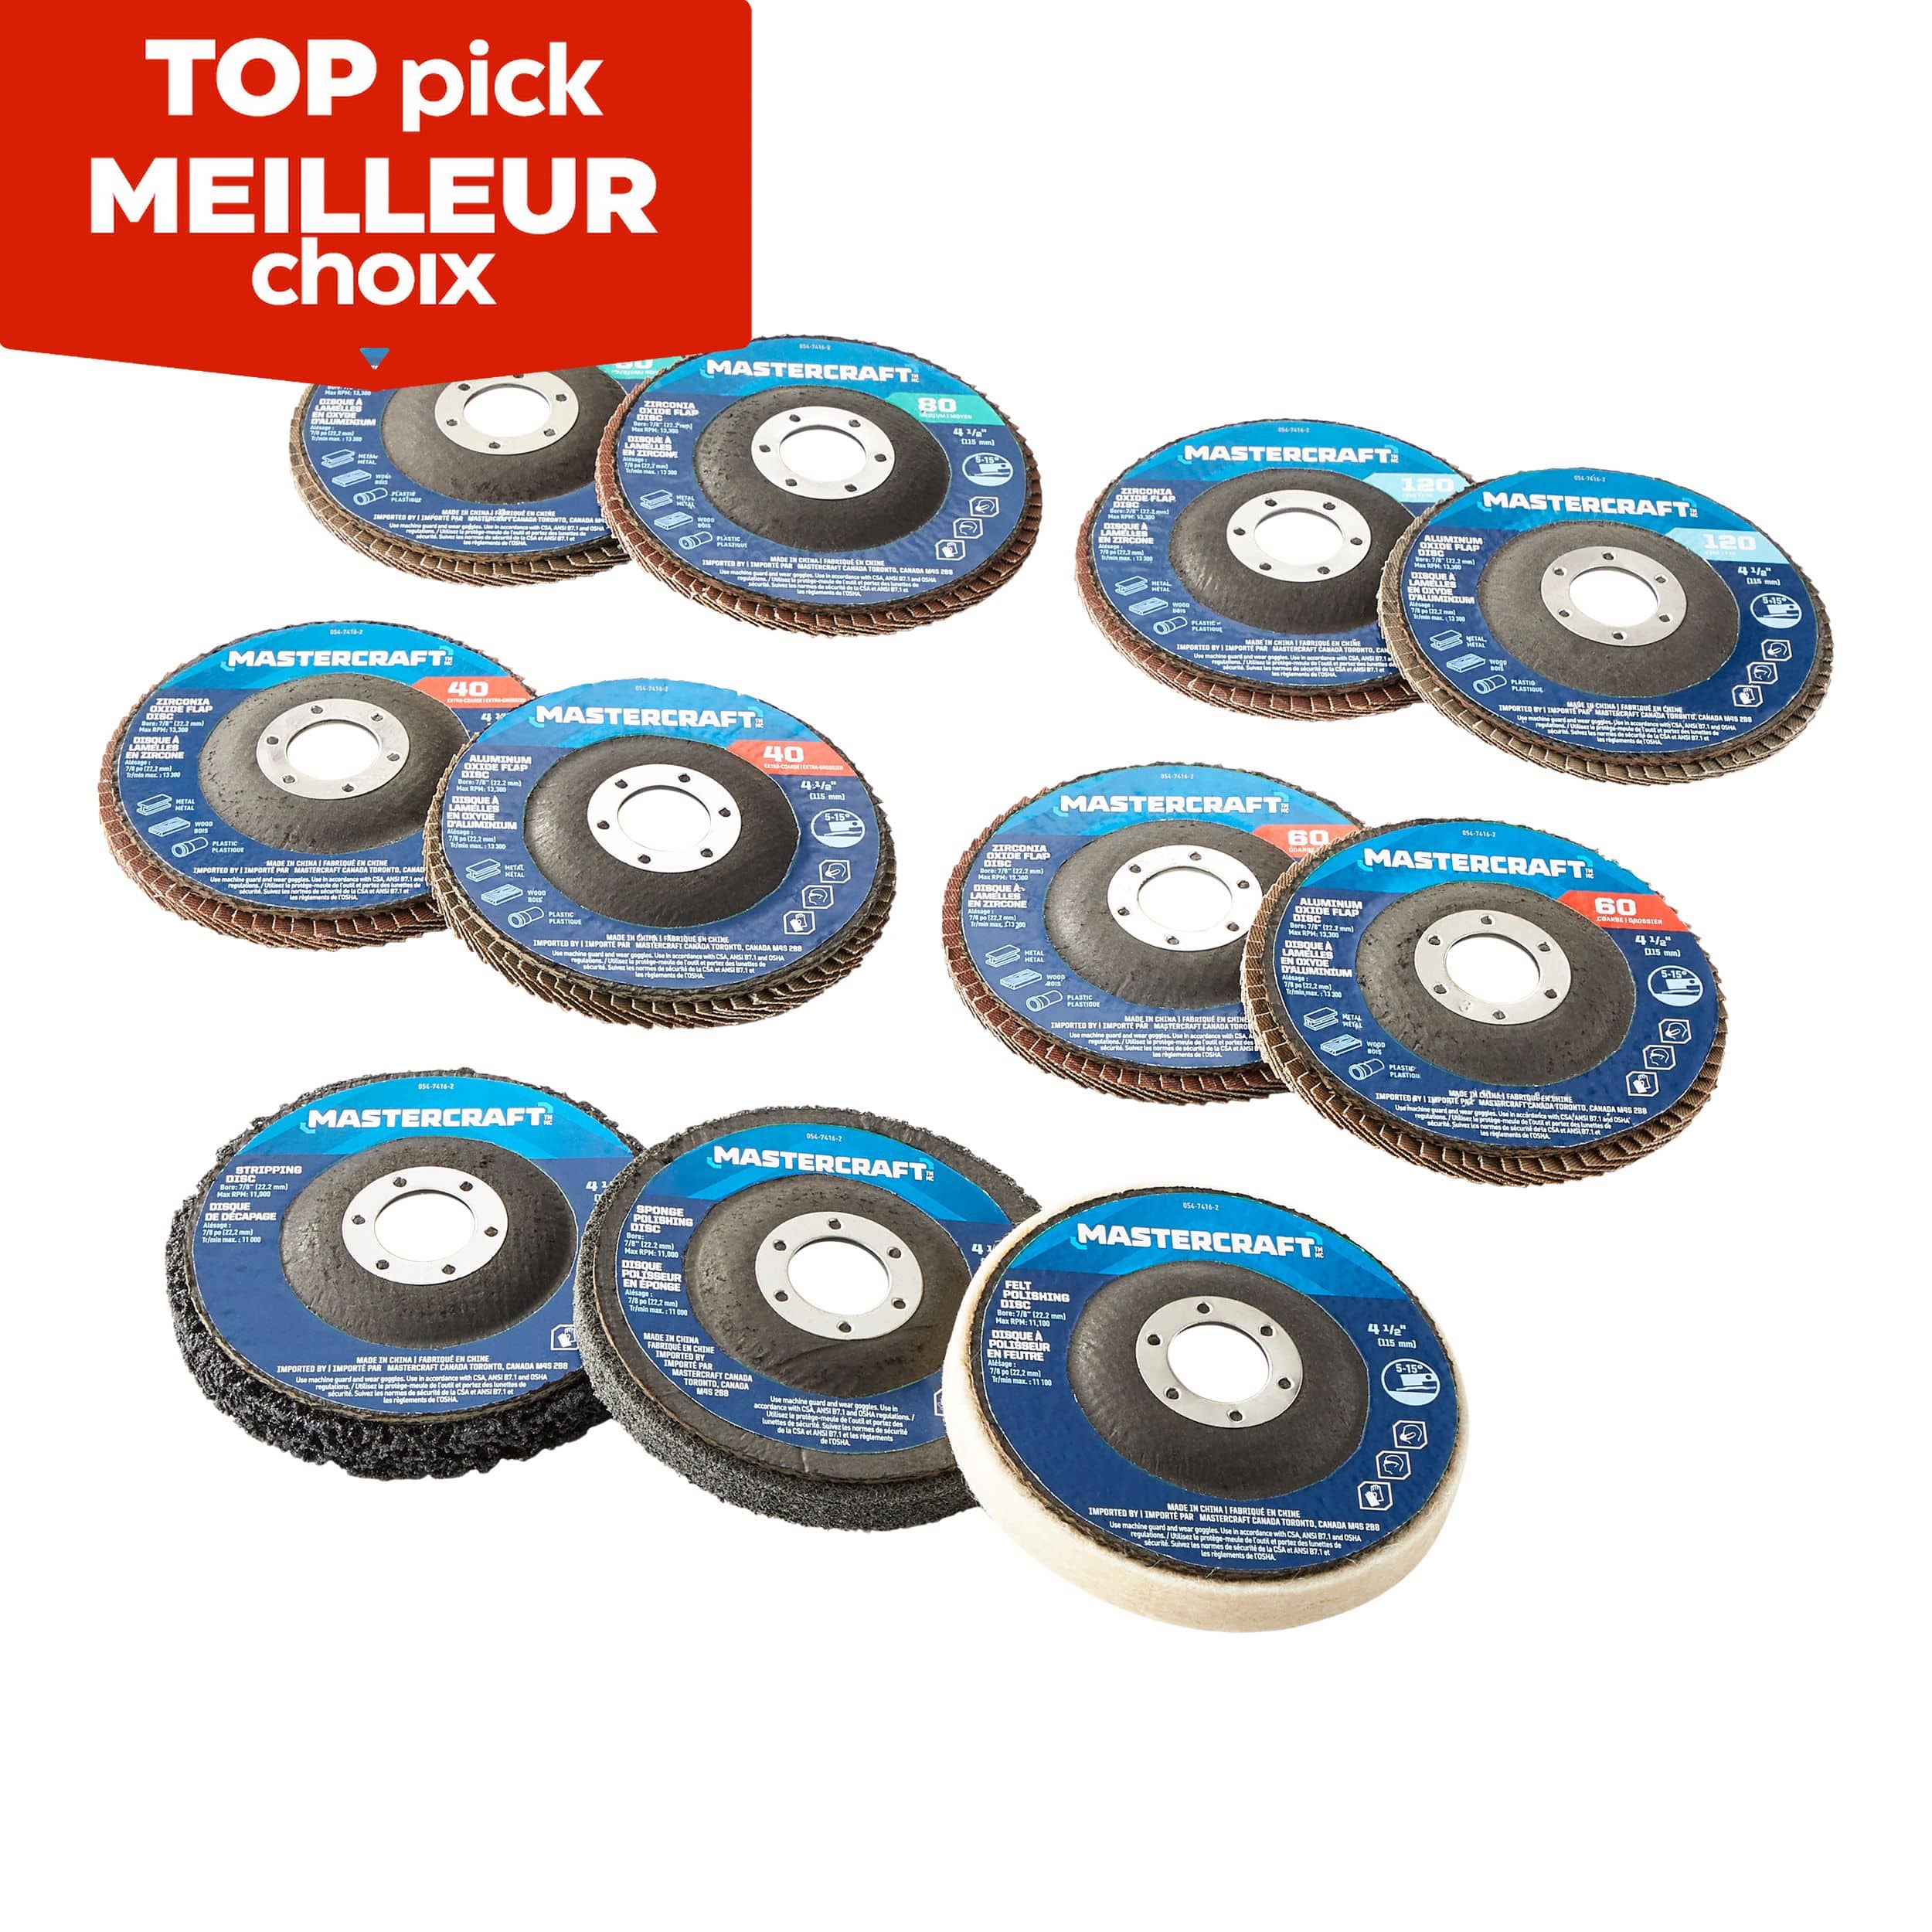 Difference Between Buffing and Polishing Wheels and Discs — Benchmark  Abrasives